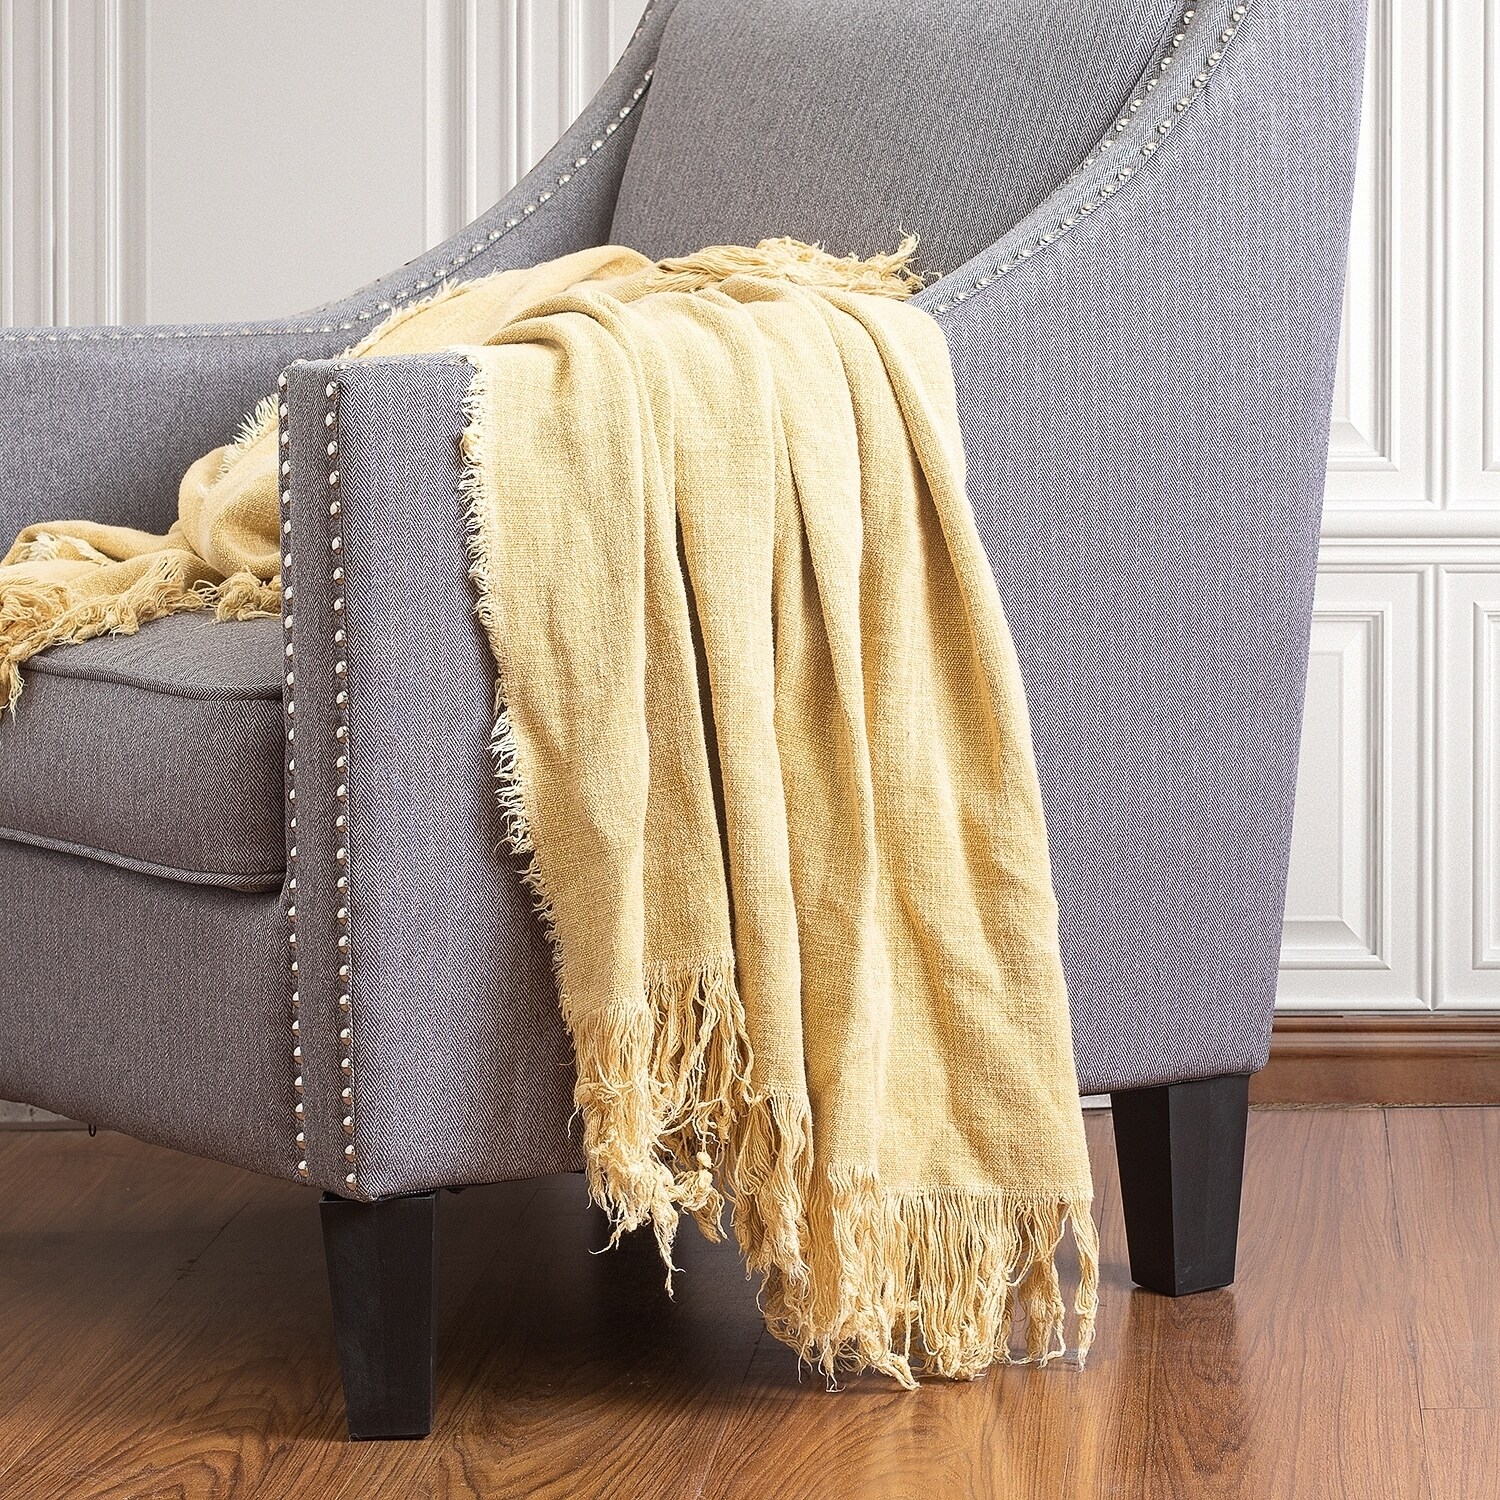 Farm House Washed Linen Throw Blanket Overstock 30882738